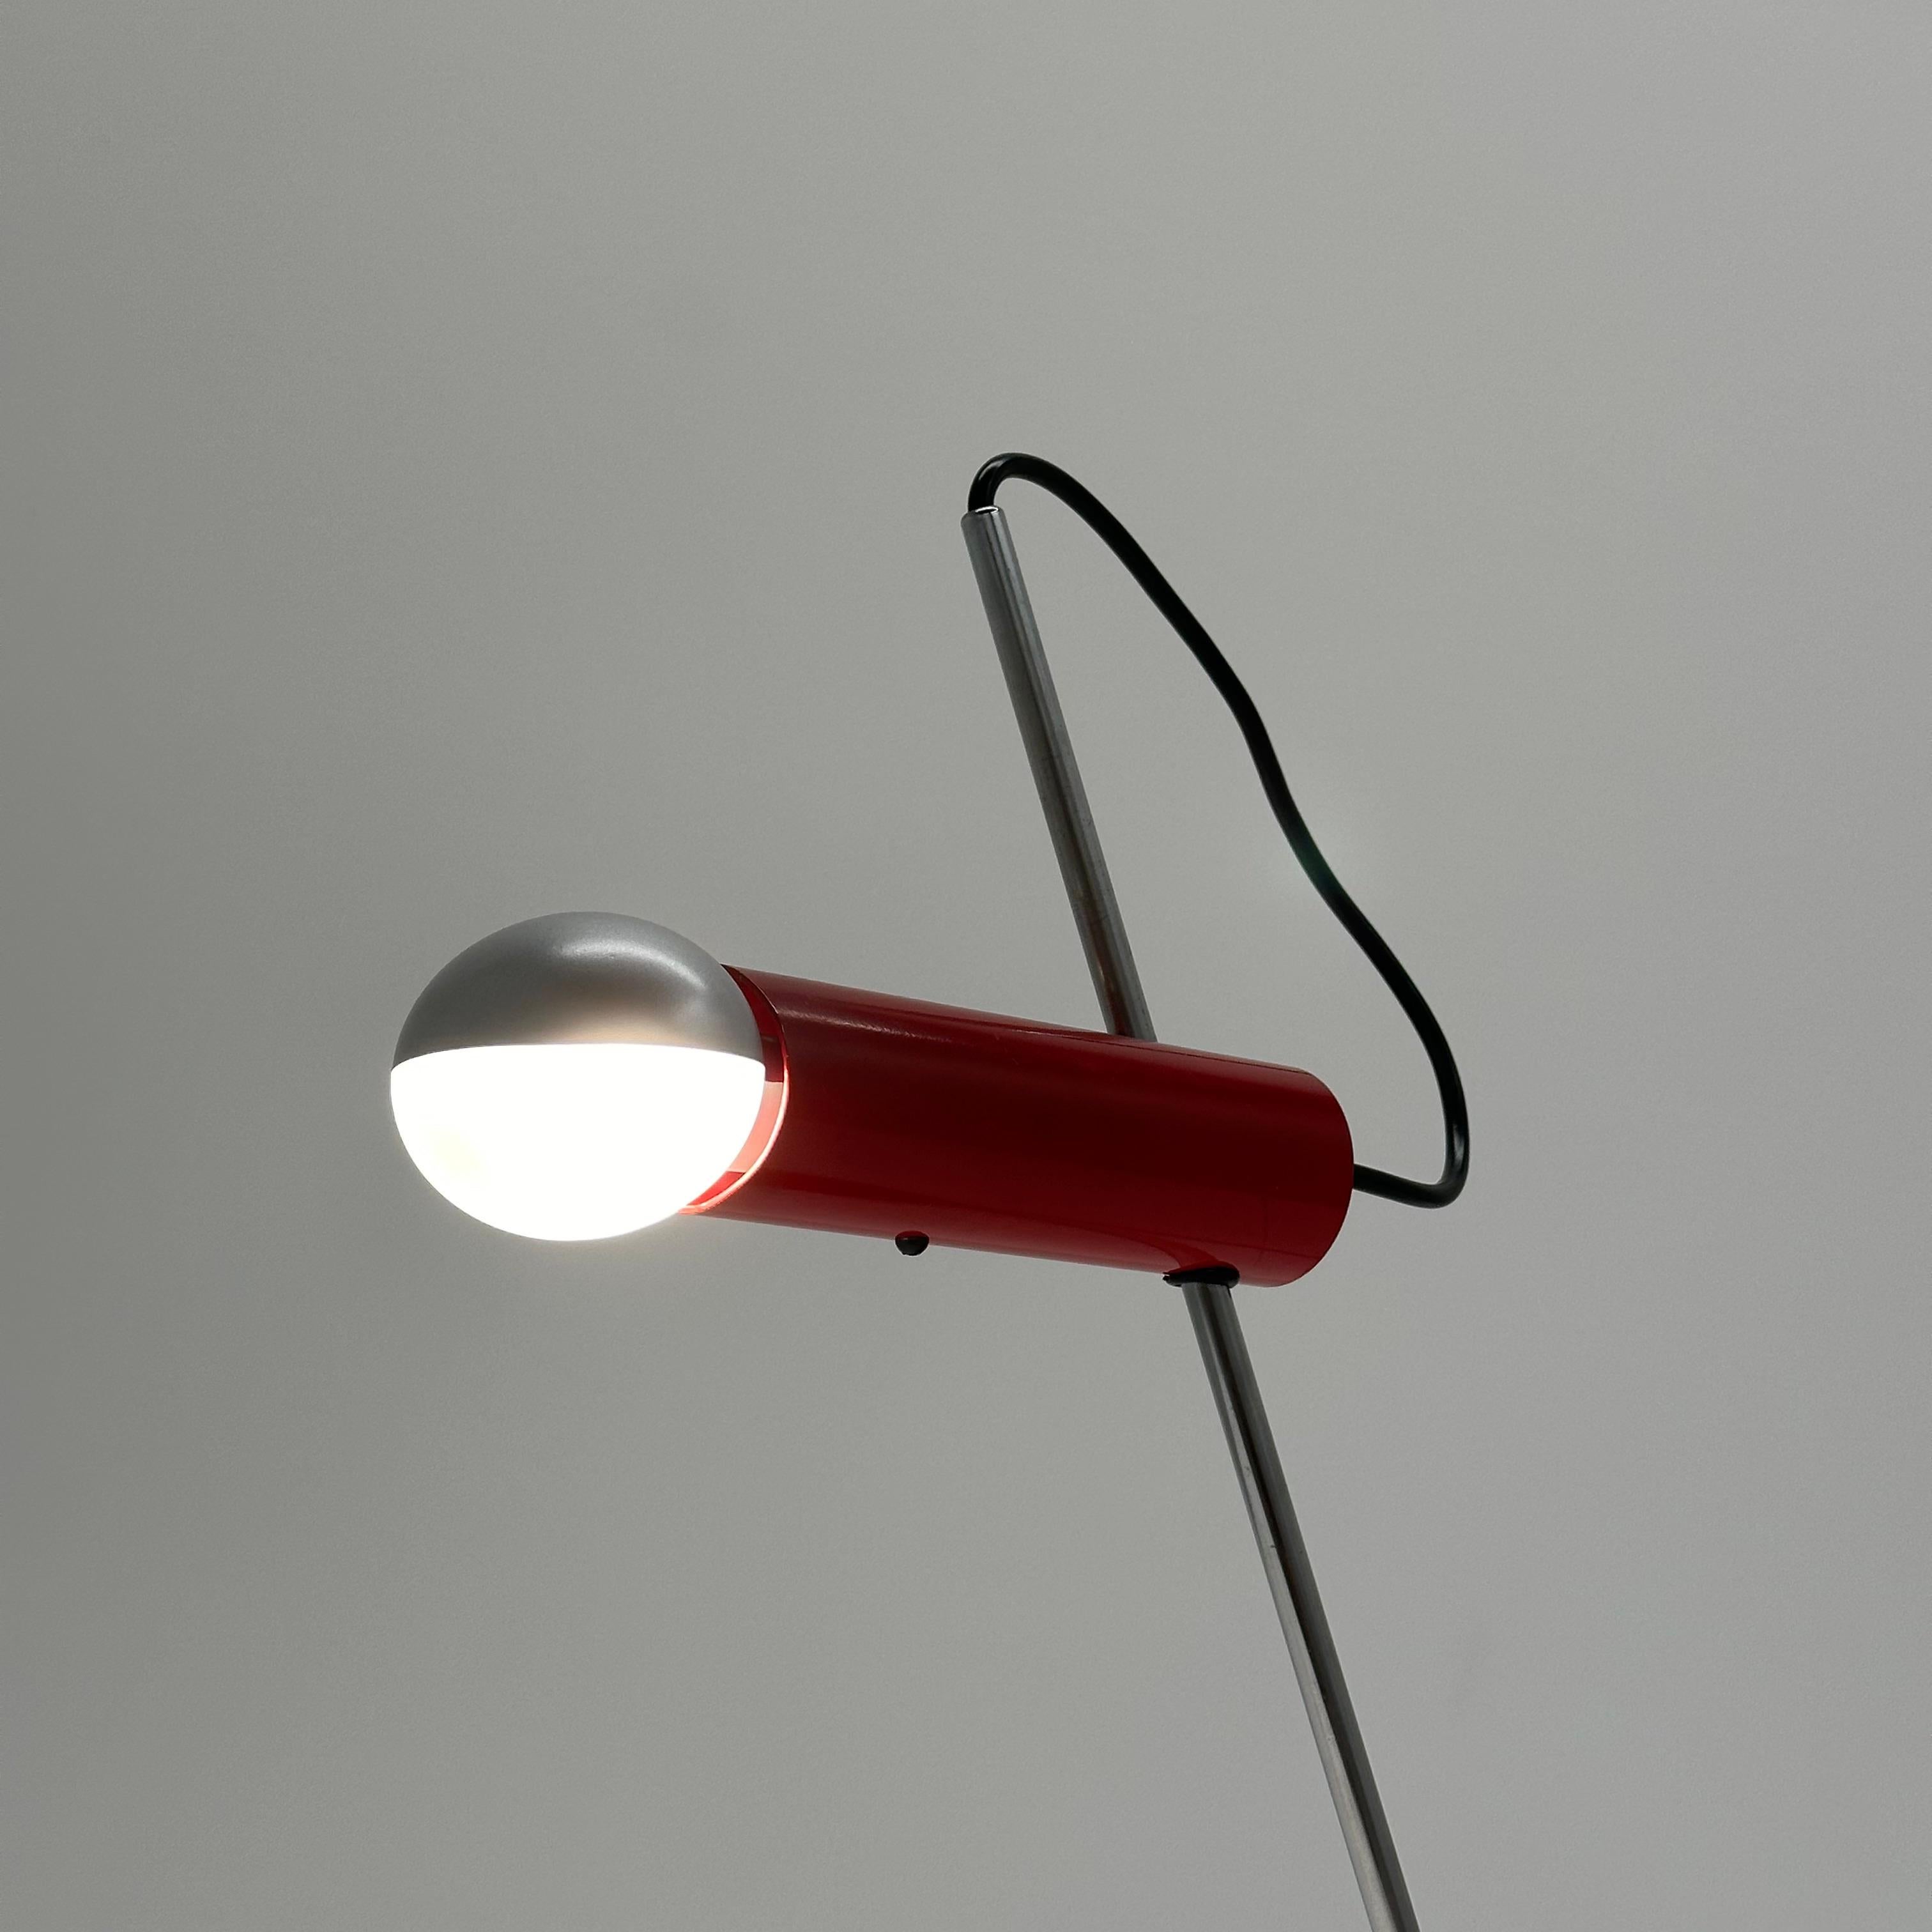 Gino Sarfatti early red model 566 table lamp for Arteluce, Italy, 1956

Stunning and Iconic Gino Sarfatti model 565 lamp for Arteluce designed in 1956 in rare red color.

Additional Information:
Materials: Enameled steel, aluminum
Dimensions: 18